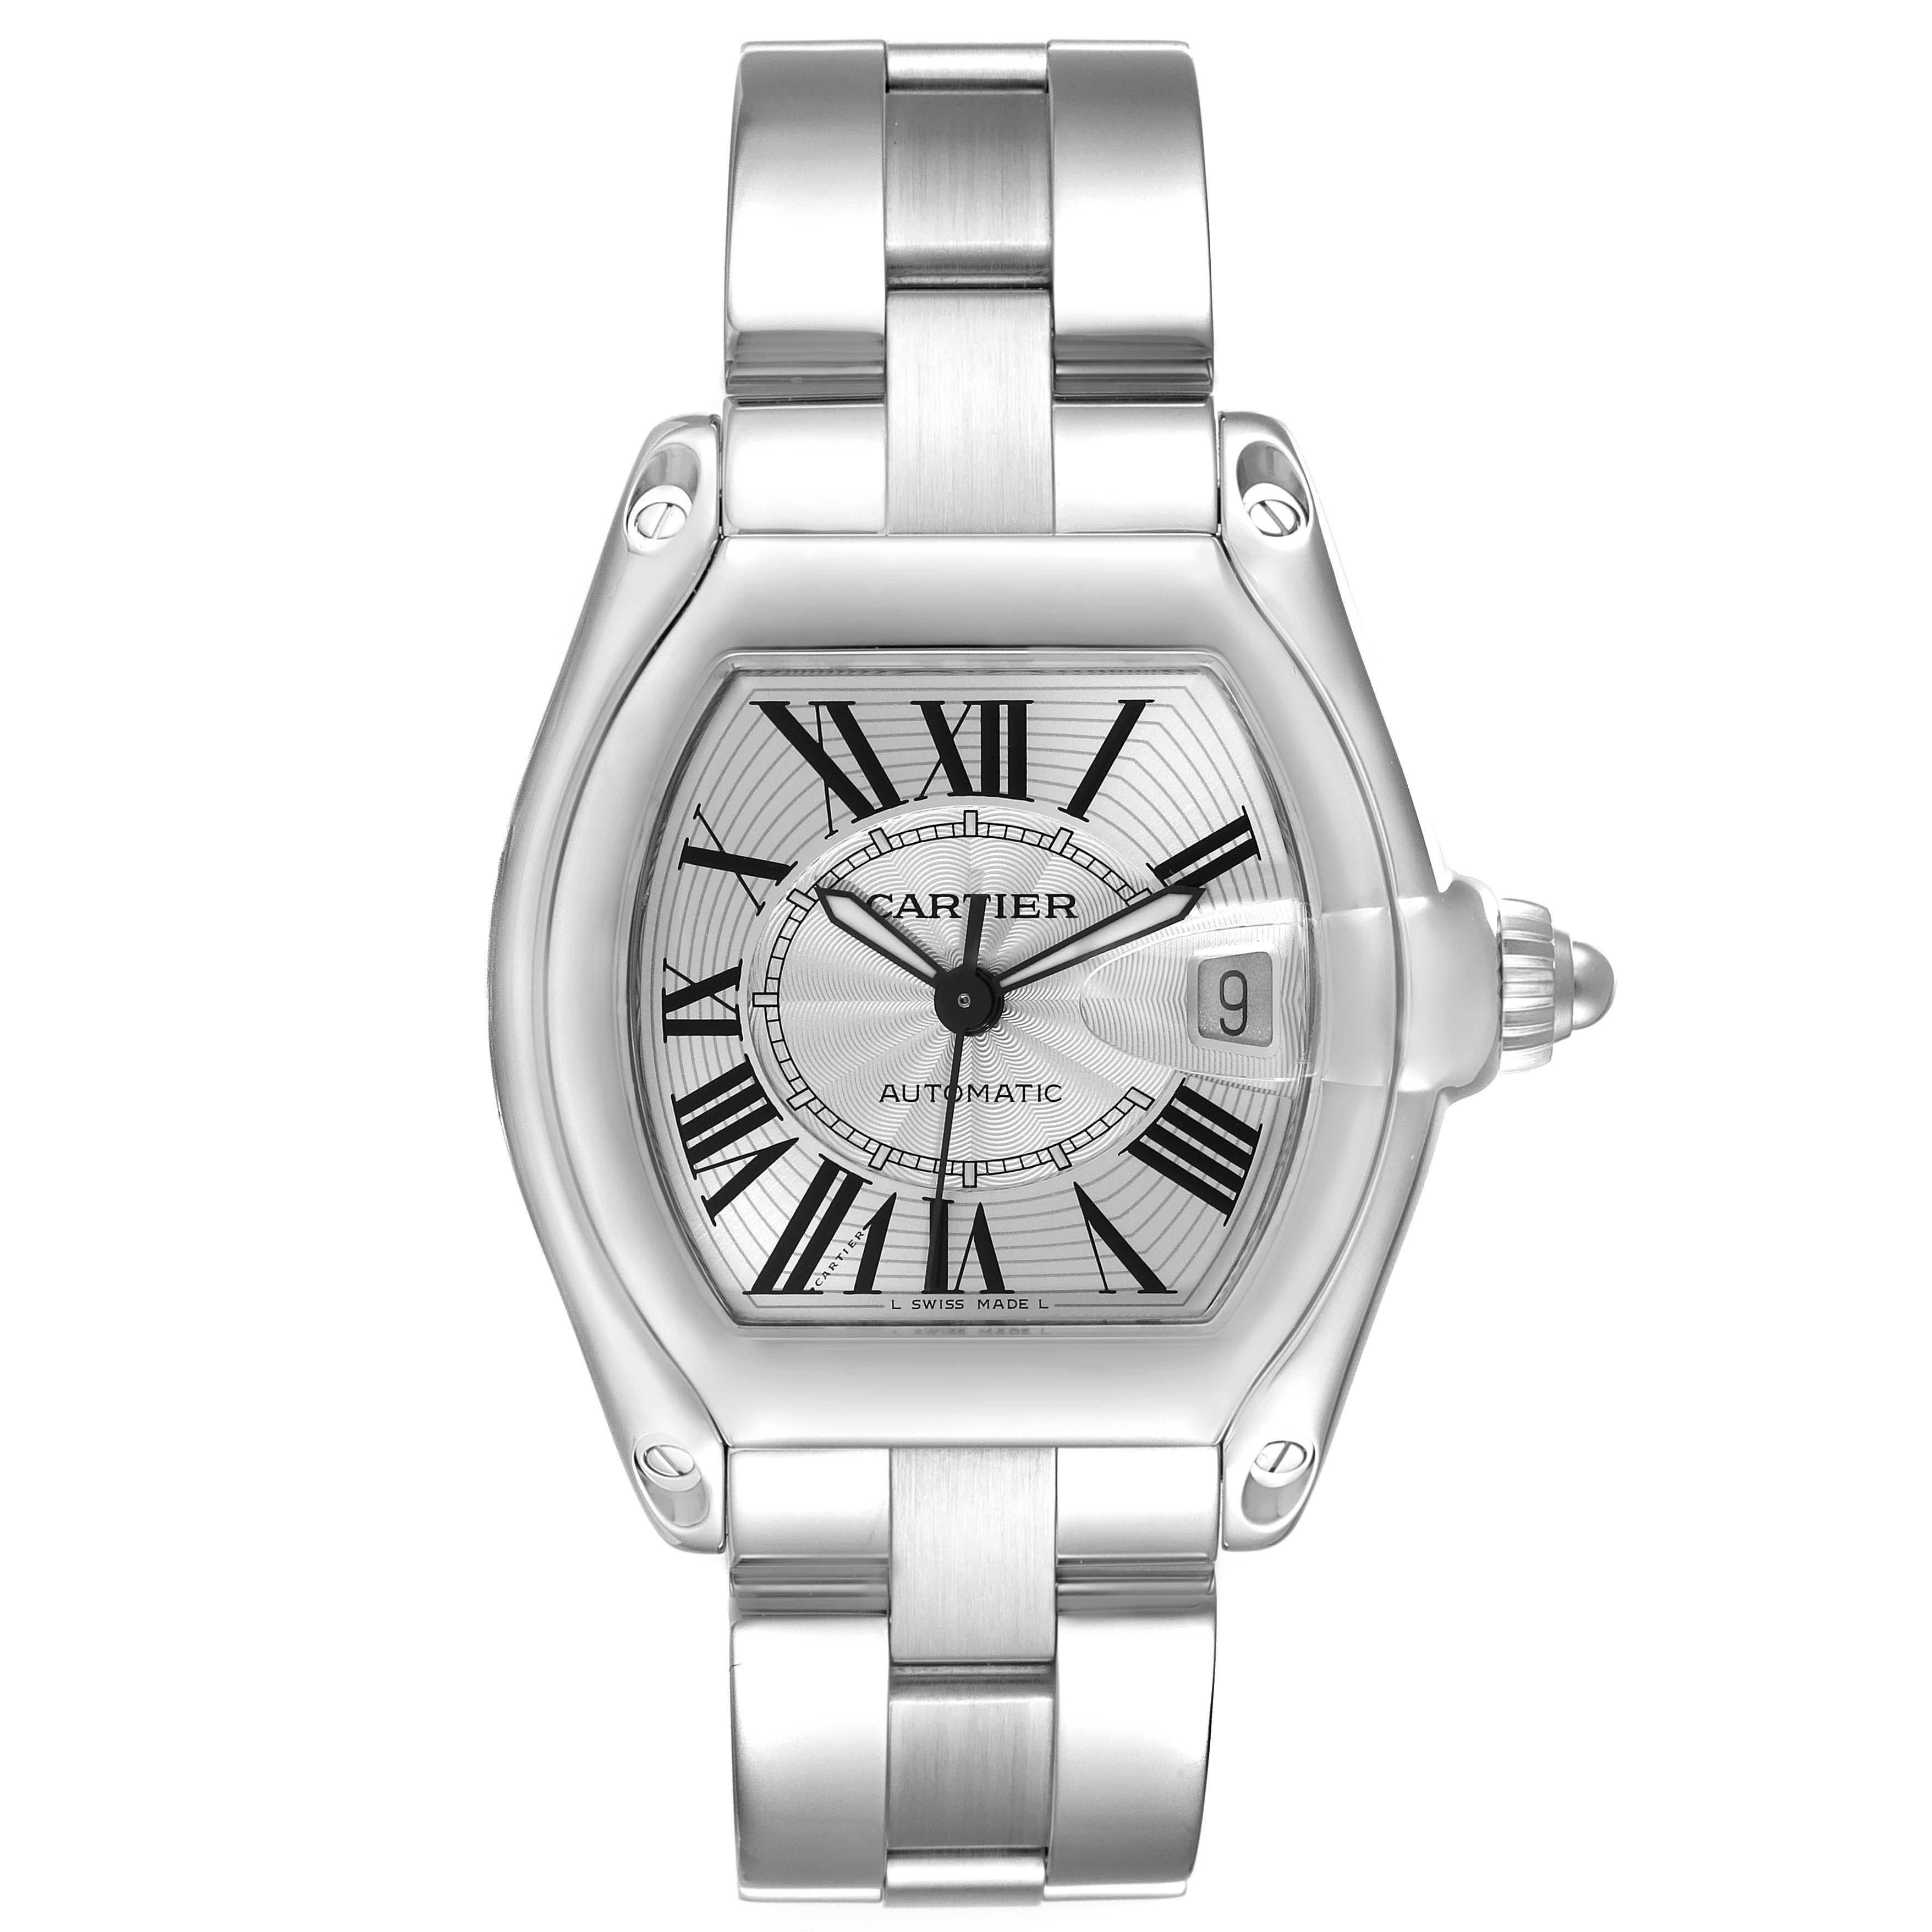 Cartier Roadster Large Silver Dial Steel Mens Watch W62025V3 Papers. Automatic self-winding movement. Stainless steel tonneau shaped case 38 x 43 mm. . Scratch resistant sapphire crystal with cyclops magnifying glass. Silver dial with black Roman